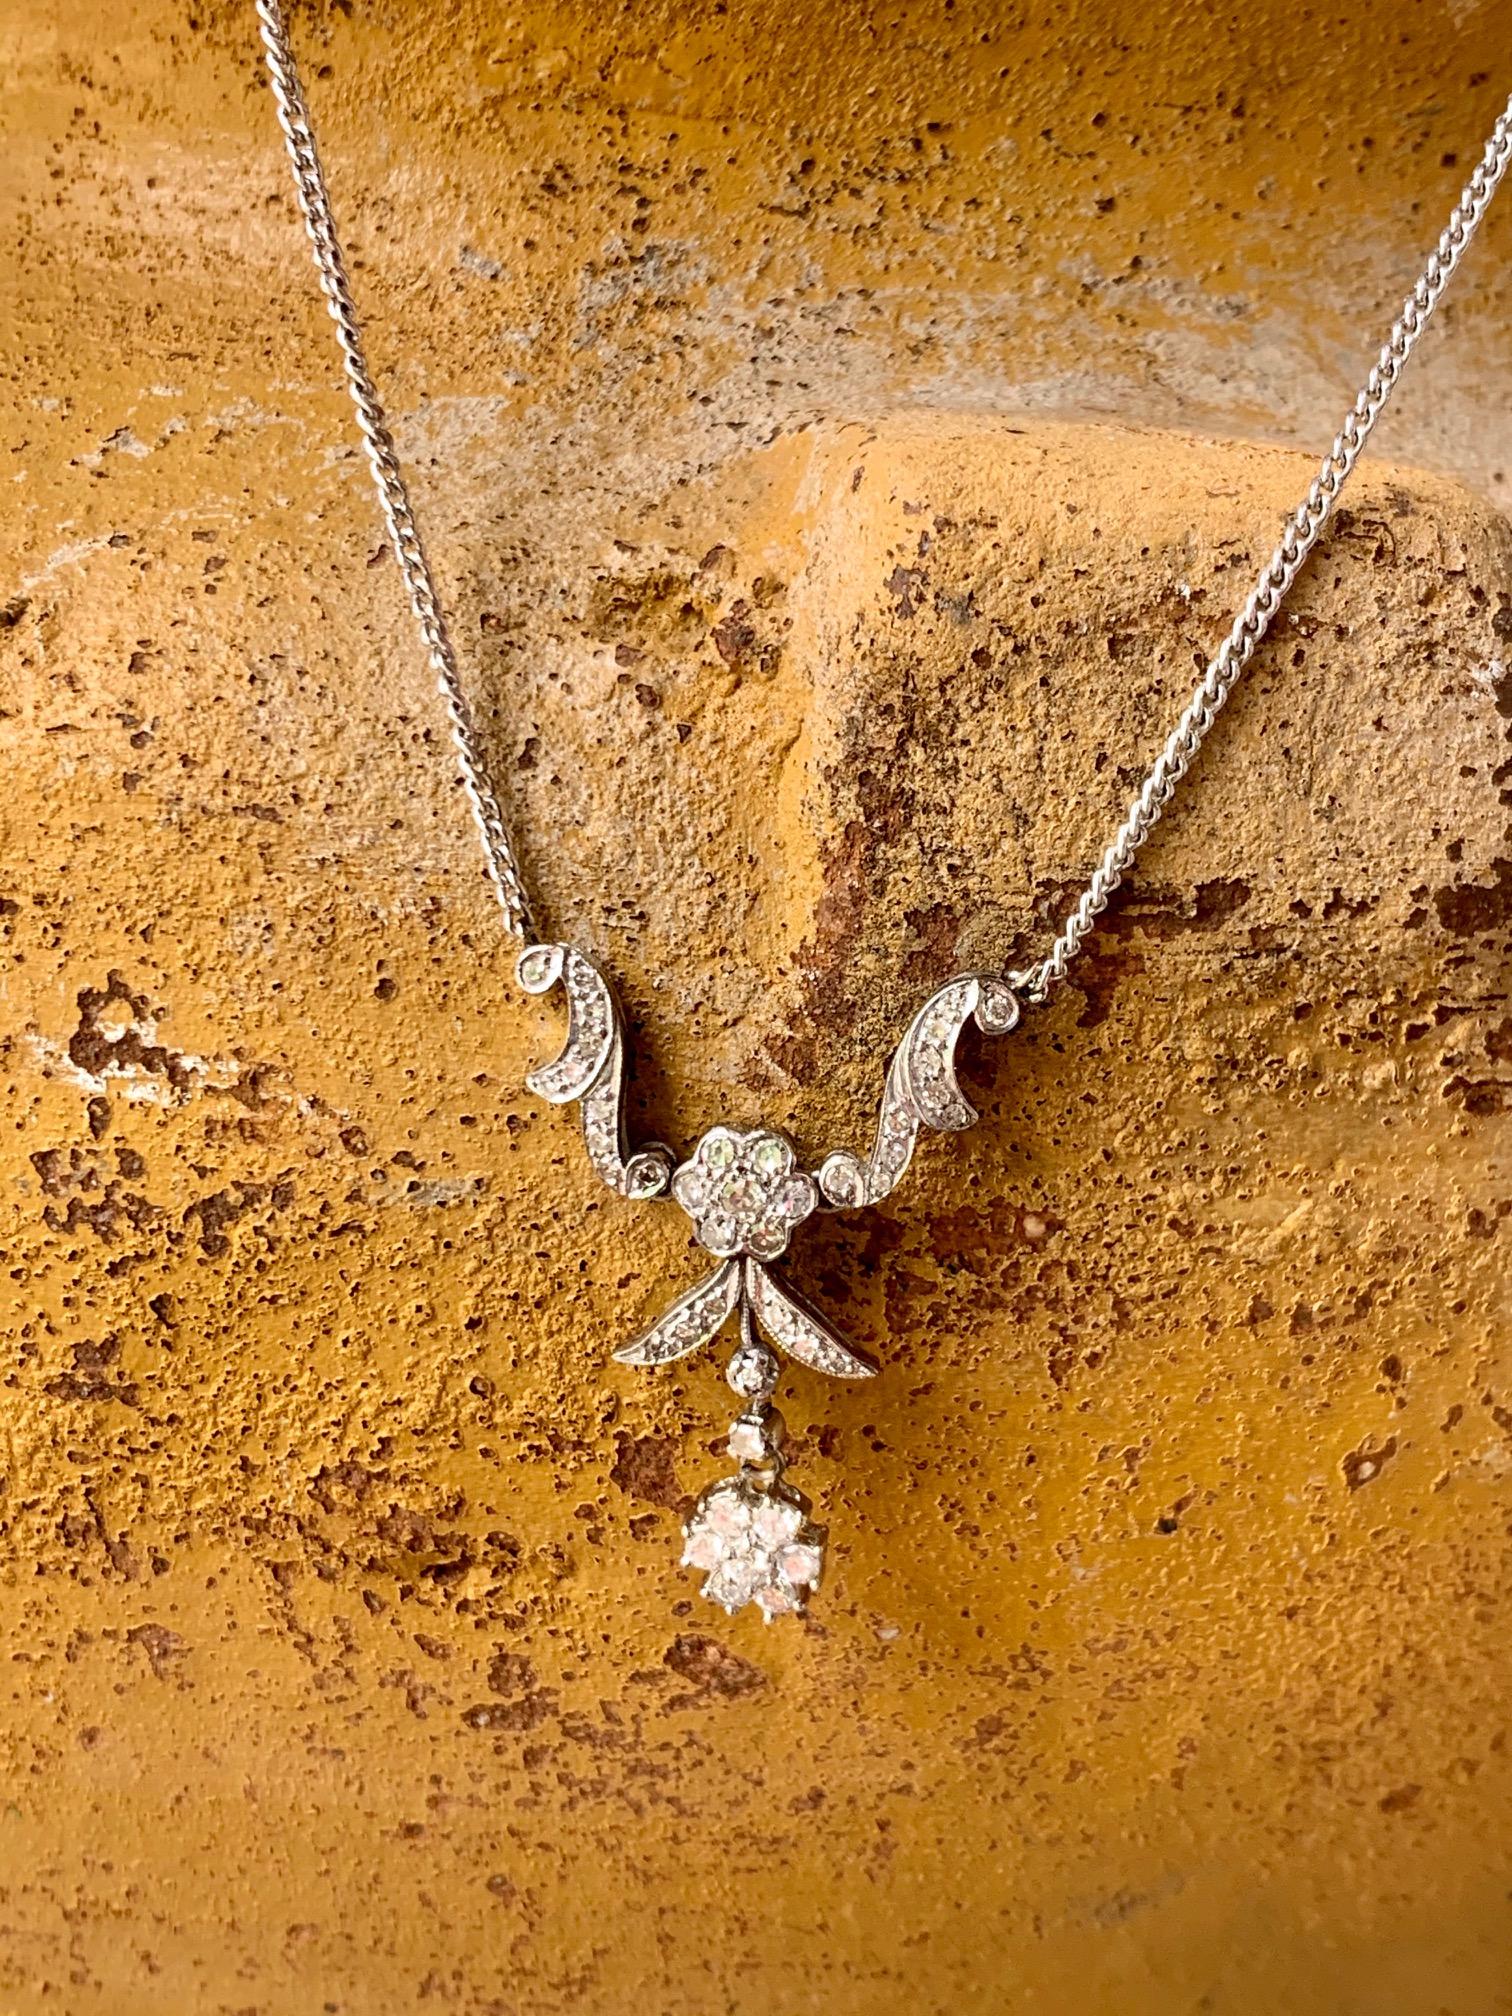 This is a uniquely-shaped pendant with diamonds set into 14k white gold.   There are single and full cut diamonds featured in a scroll design reaching downwards to the center flower within the pendant.
cwt:  .80
Quality:  VS to SI
Color: H-J
The